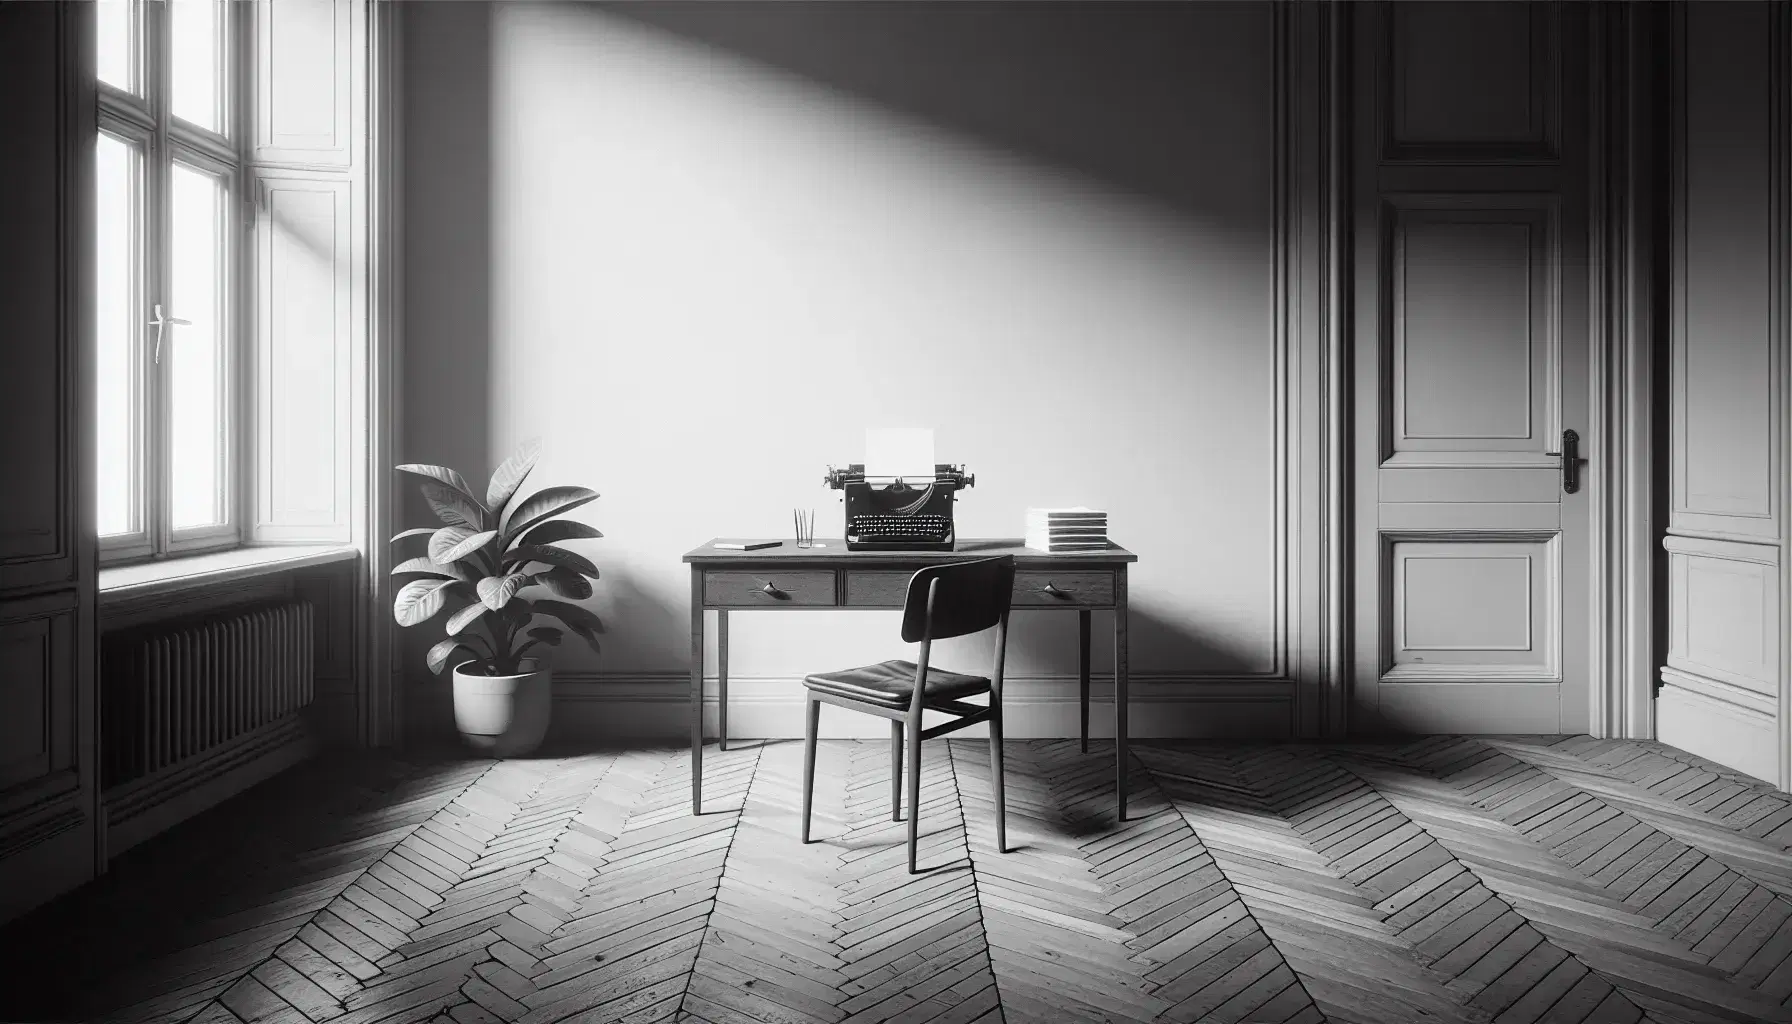 Vintage typewriter on a desk with blank paper, chair slightly pulled out, in a room with herringbone flooring and a potted plant, bathed in natural light.